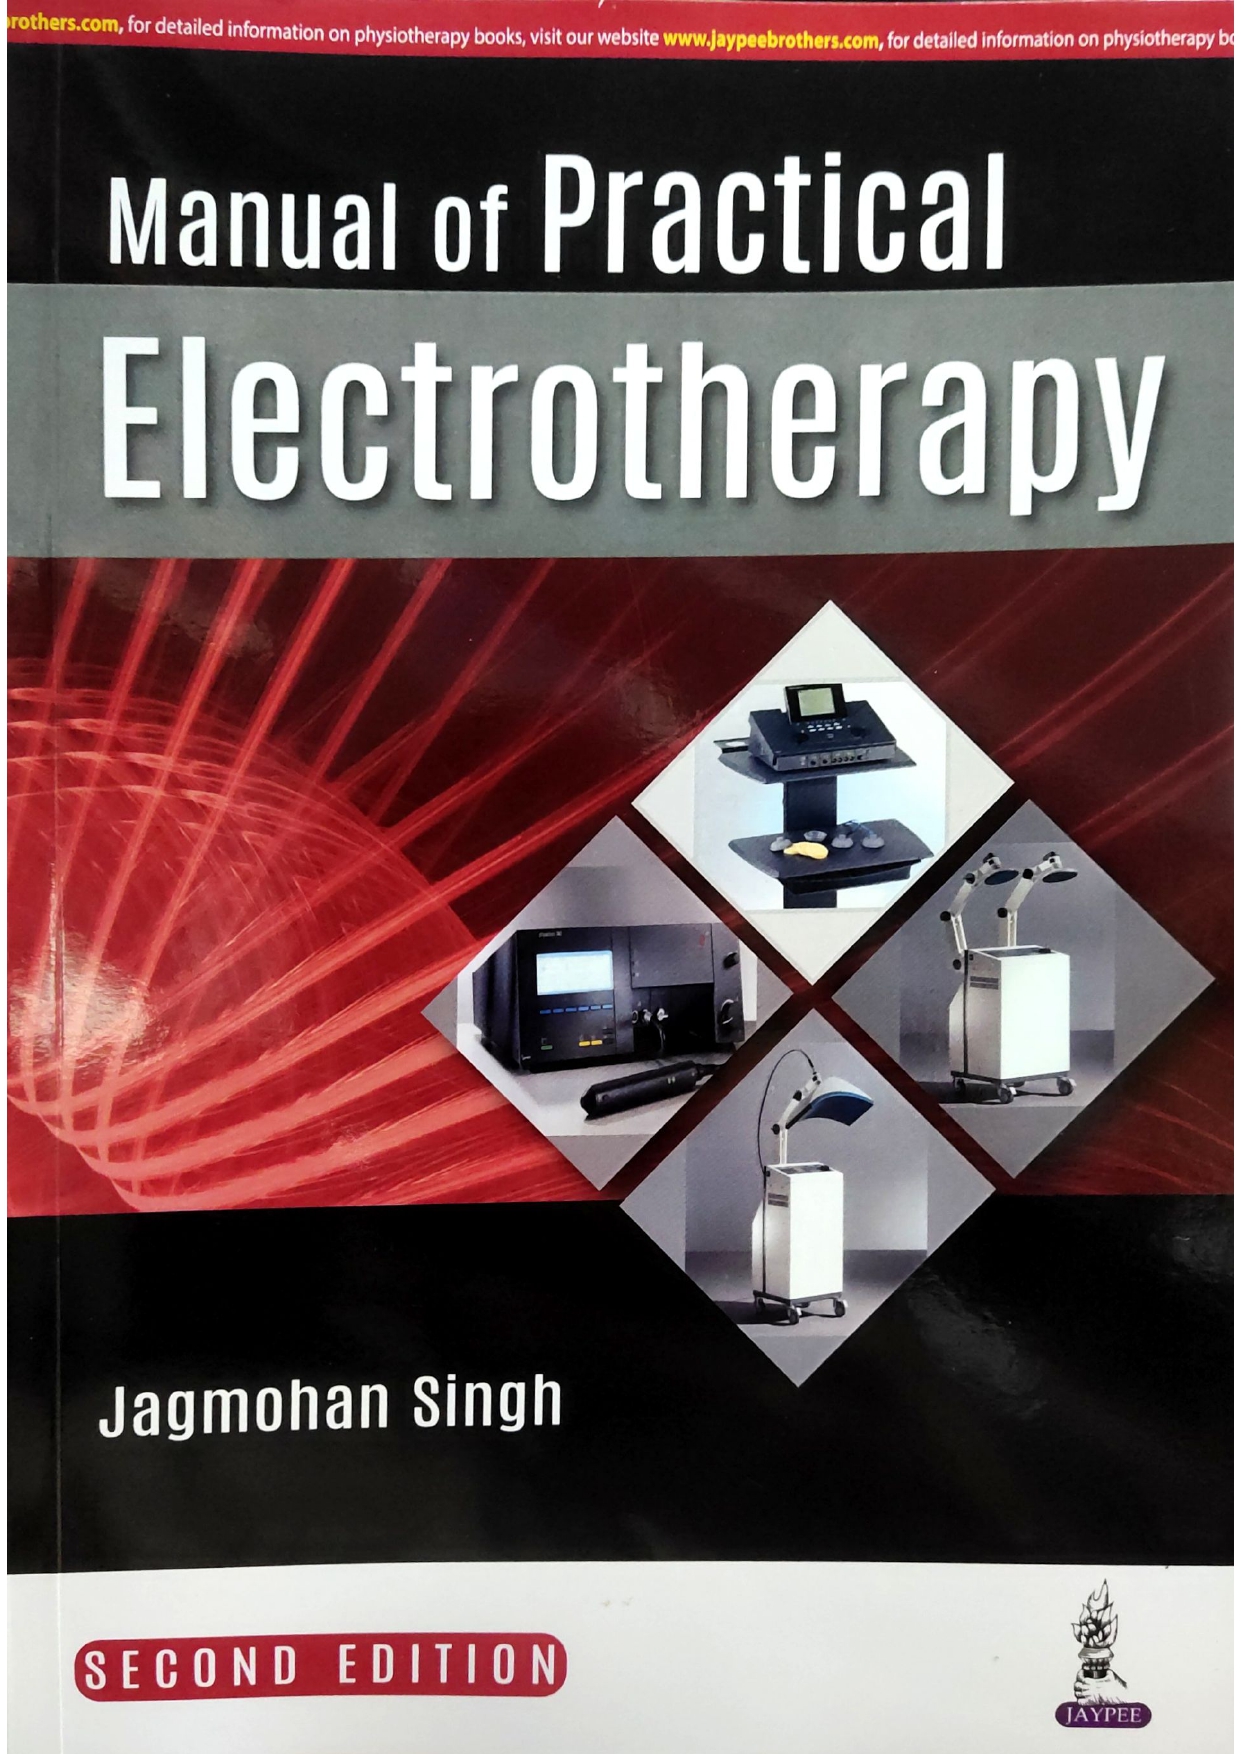 Manual of practical Electrotherapy